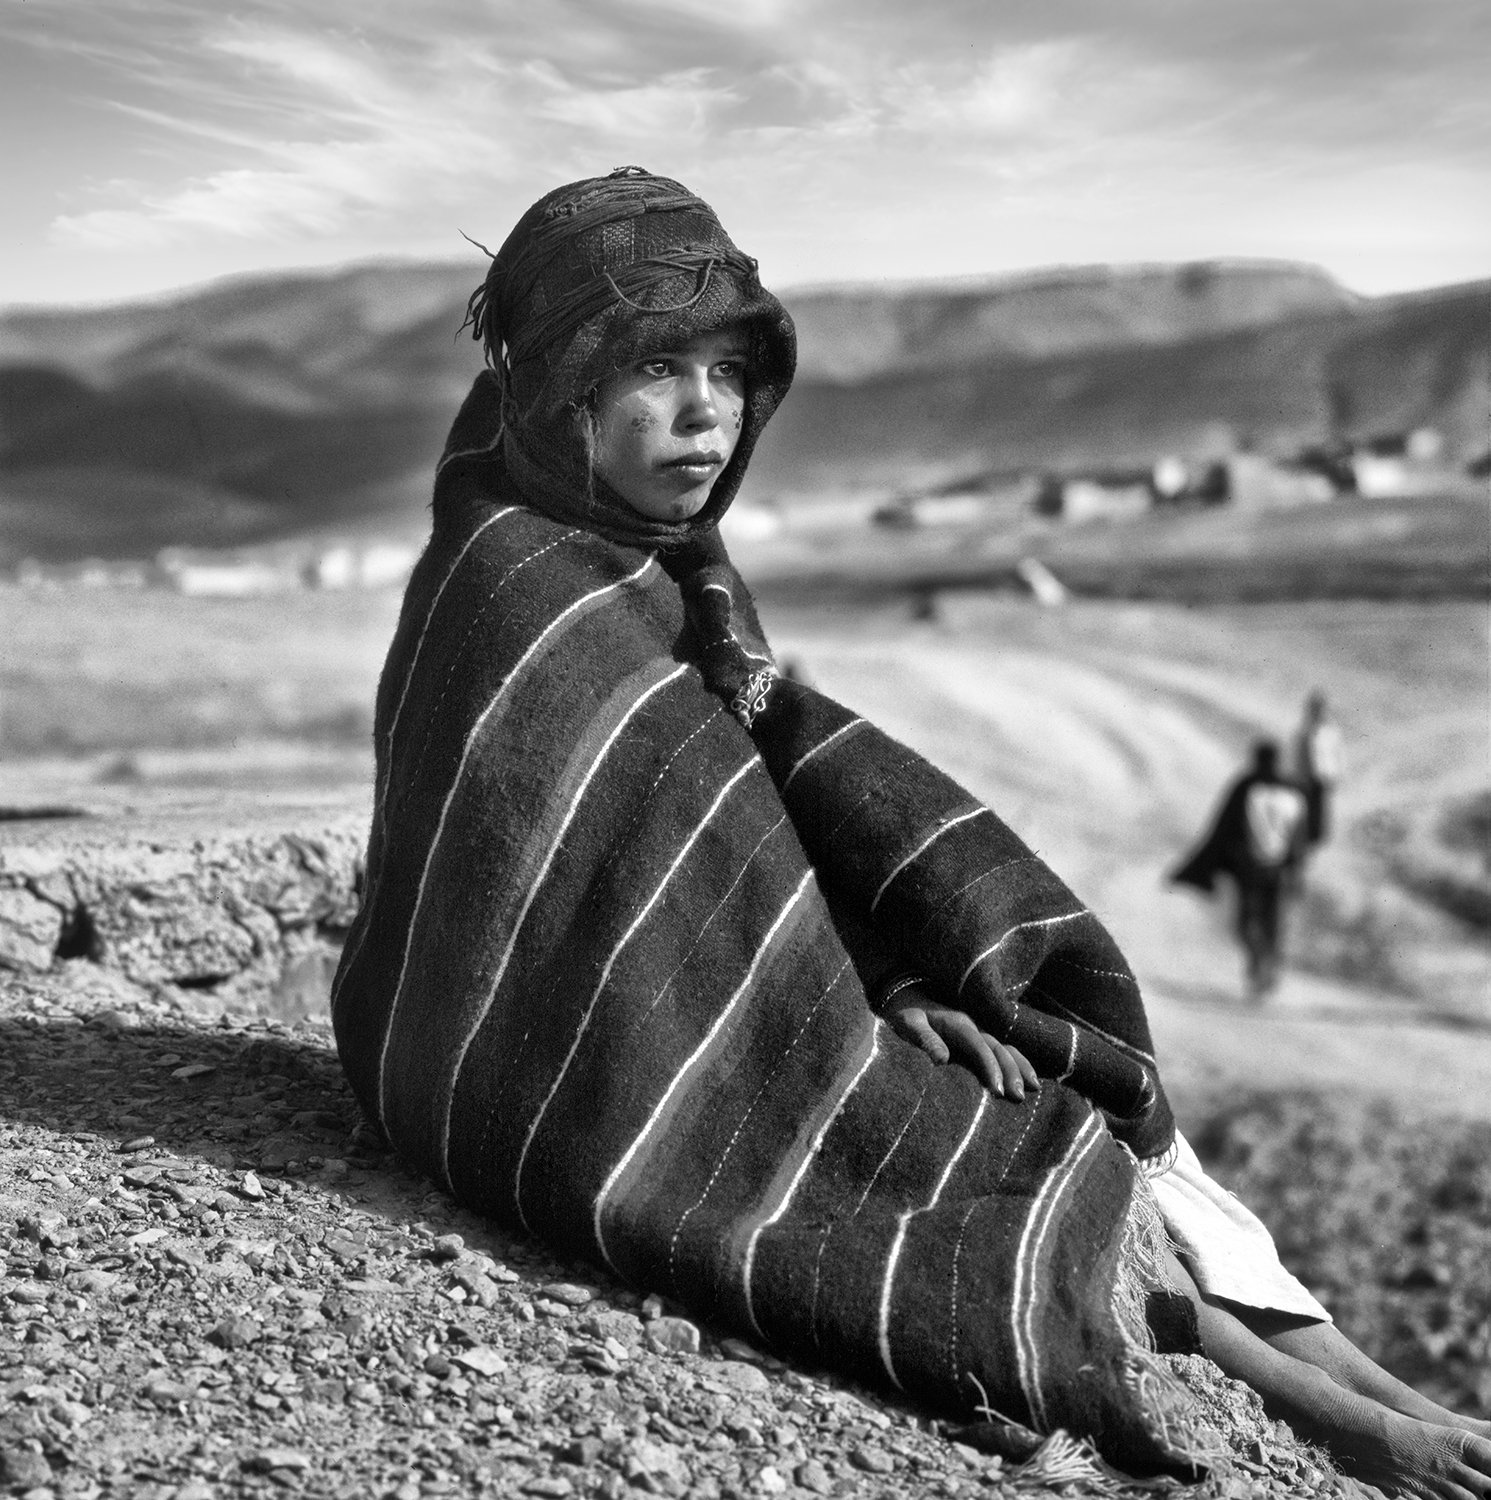 A girl from the Ait Hadiddou tribe in Imilchil a village located in the Atlas Mountains of Morocco circa 1979 Photography Pierre Toutain-Dorbec.jpg